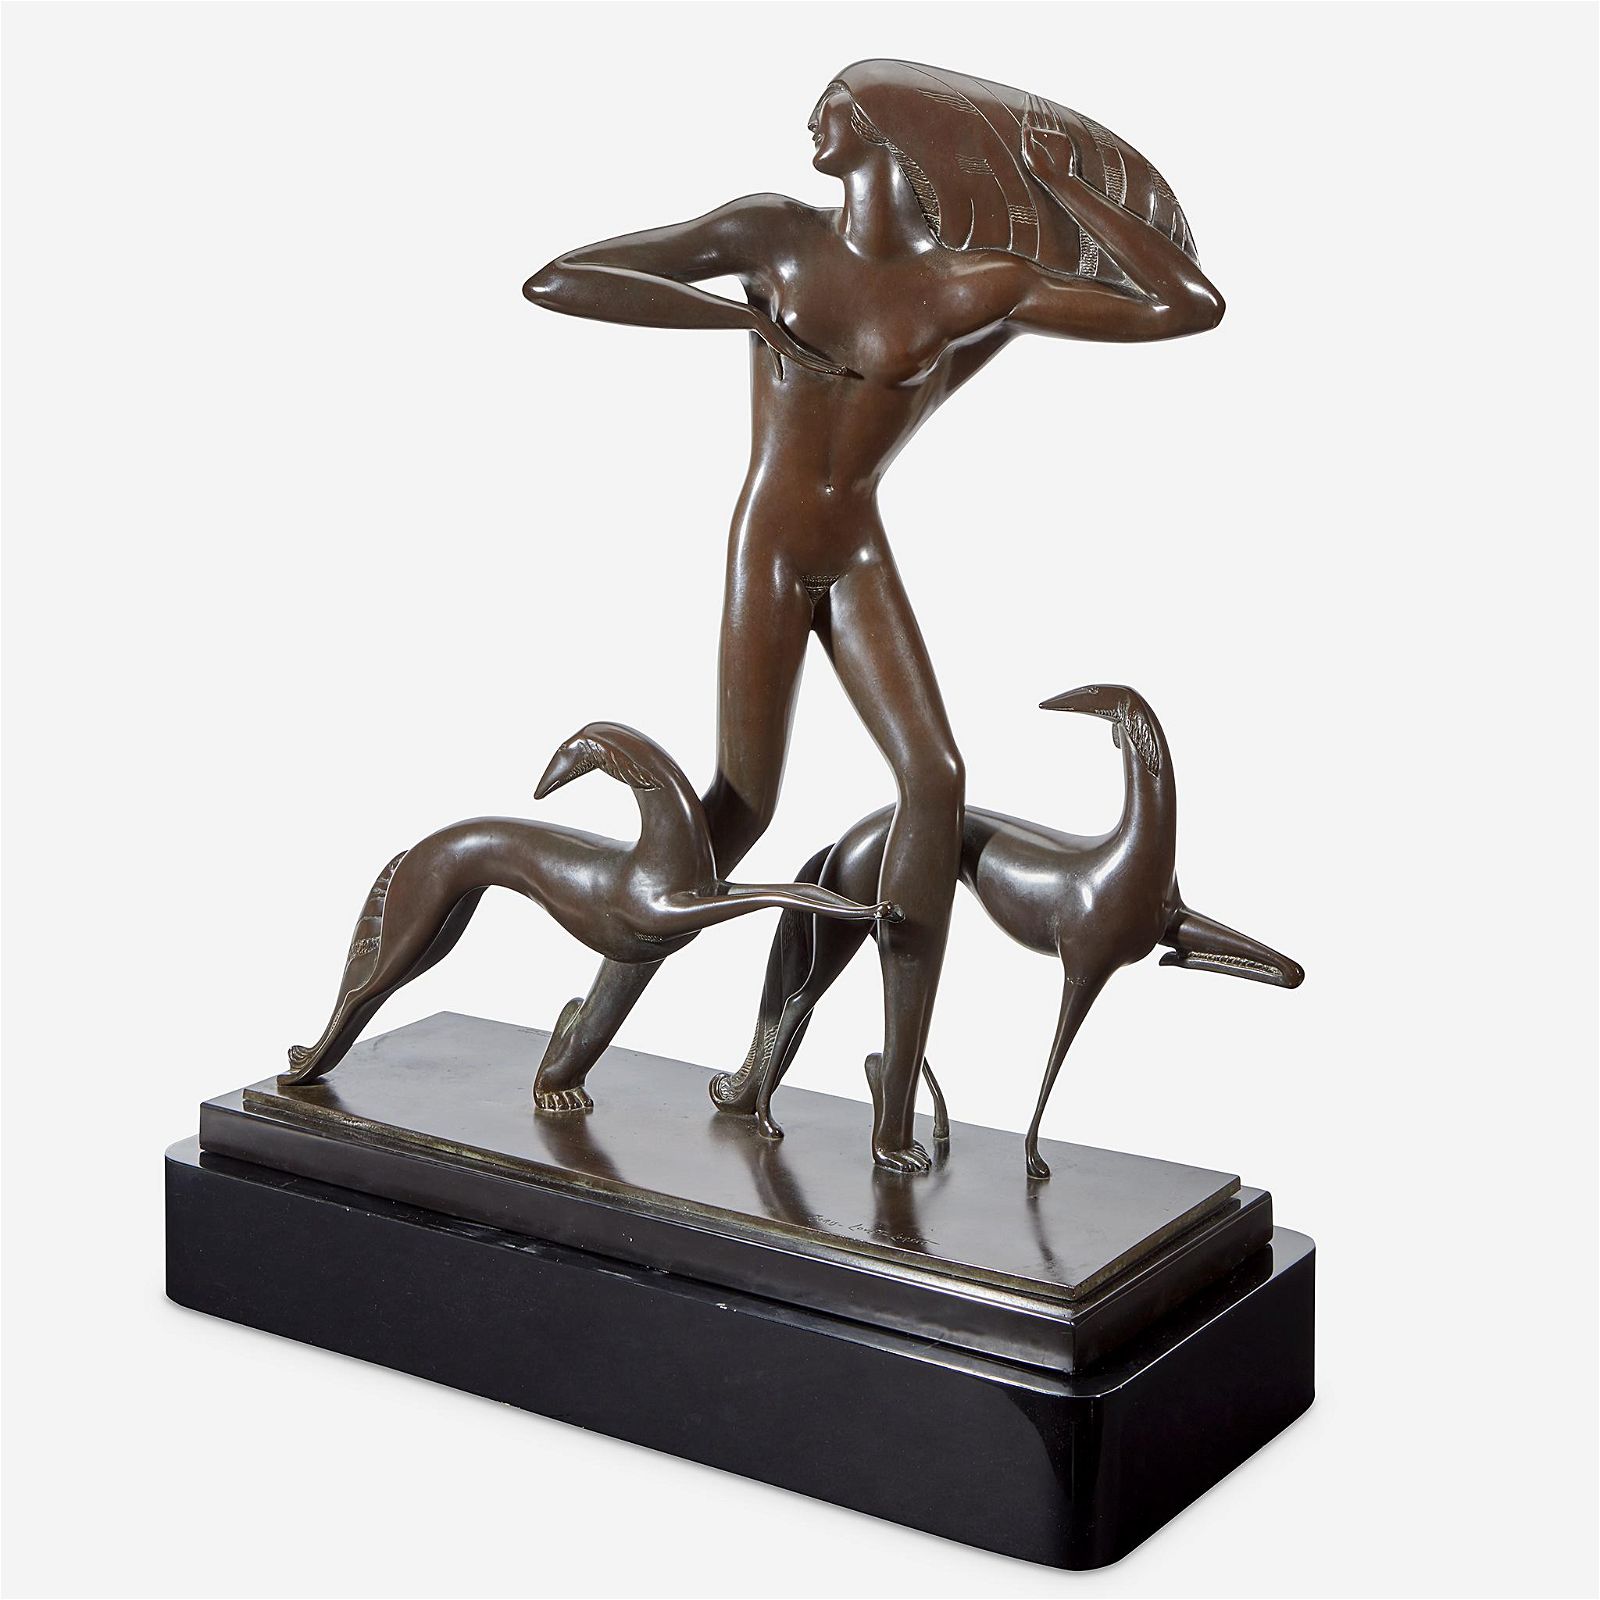 Another view of Boris Lovet-Lorski’s bronze, ‘Diana,’ which attained the highest price for the artist on the LiveAuctioneers platform when it sold for $47,500 plus the buyer’s premium in June 2021. Image courtesy of Freeman’s Hindman and LiveAuctioneers.